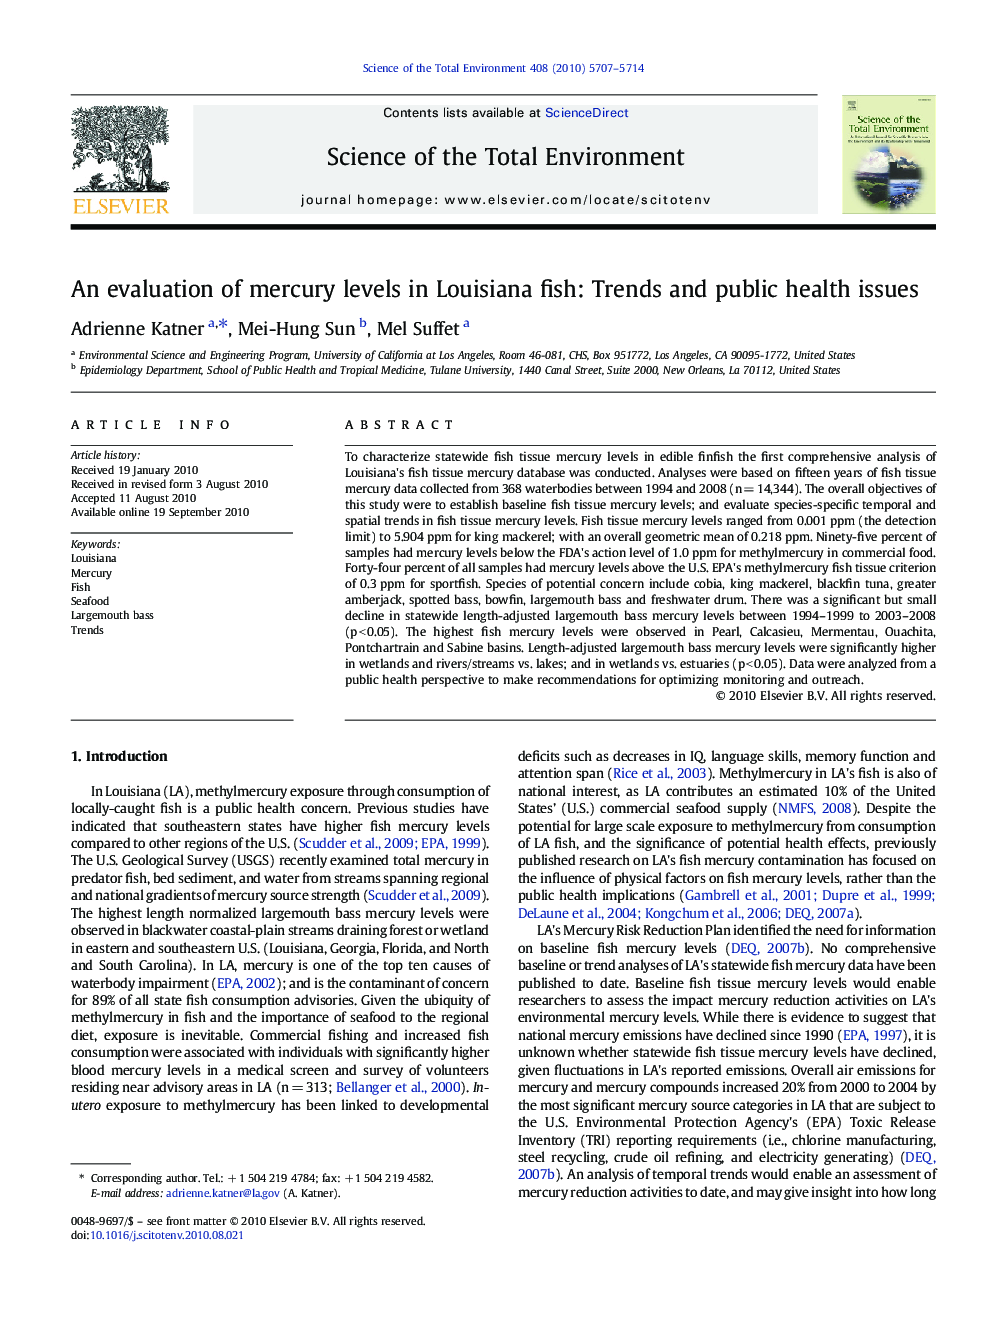 An evaluation of mercury levels in Louisiana fish: Trends and public health issues